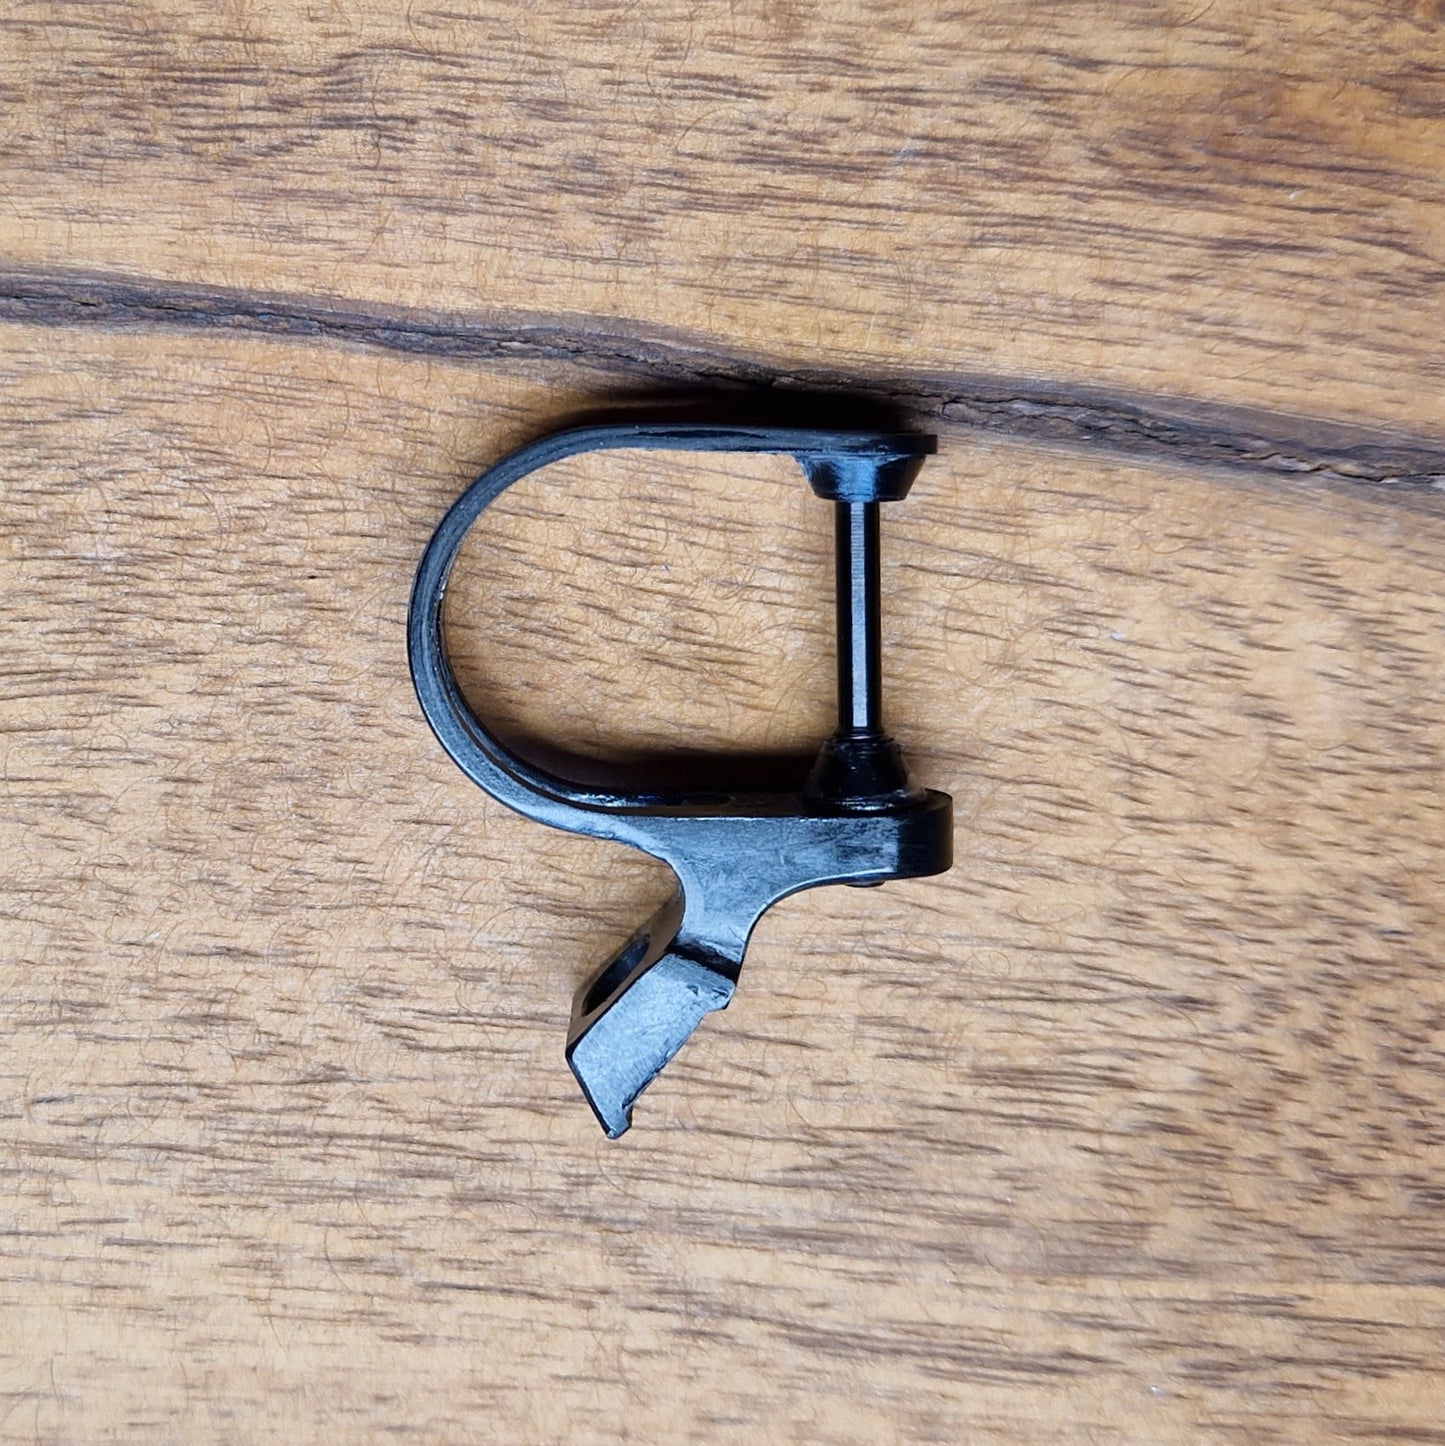 SL carbon clamp for trickstuff brakes with matchmaker